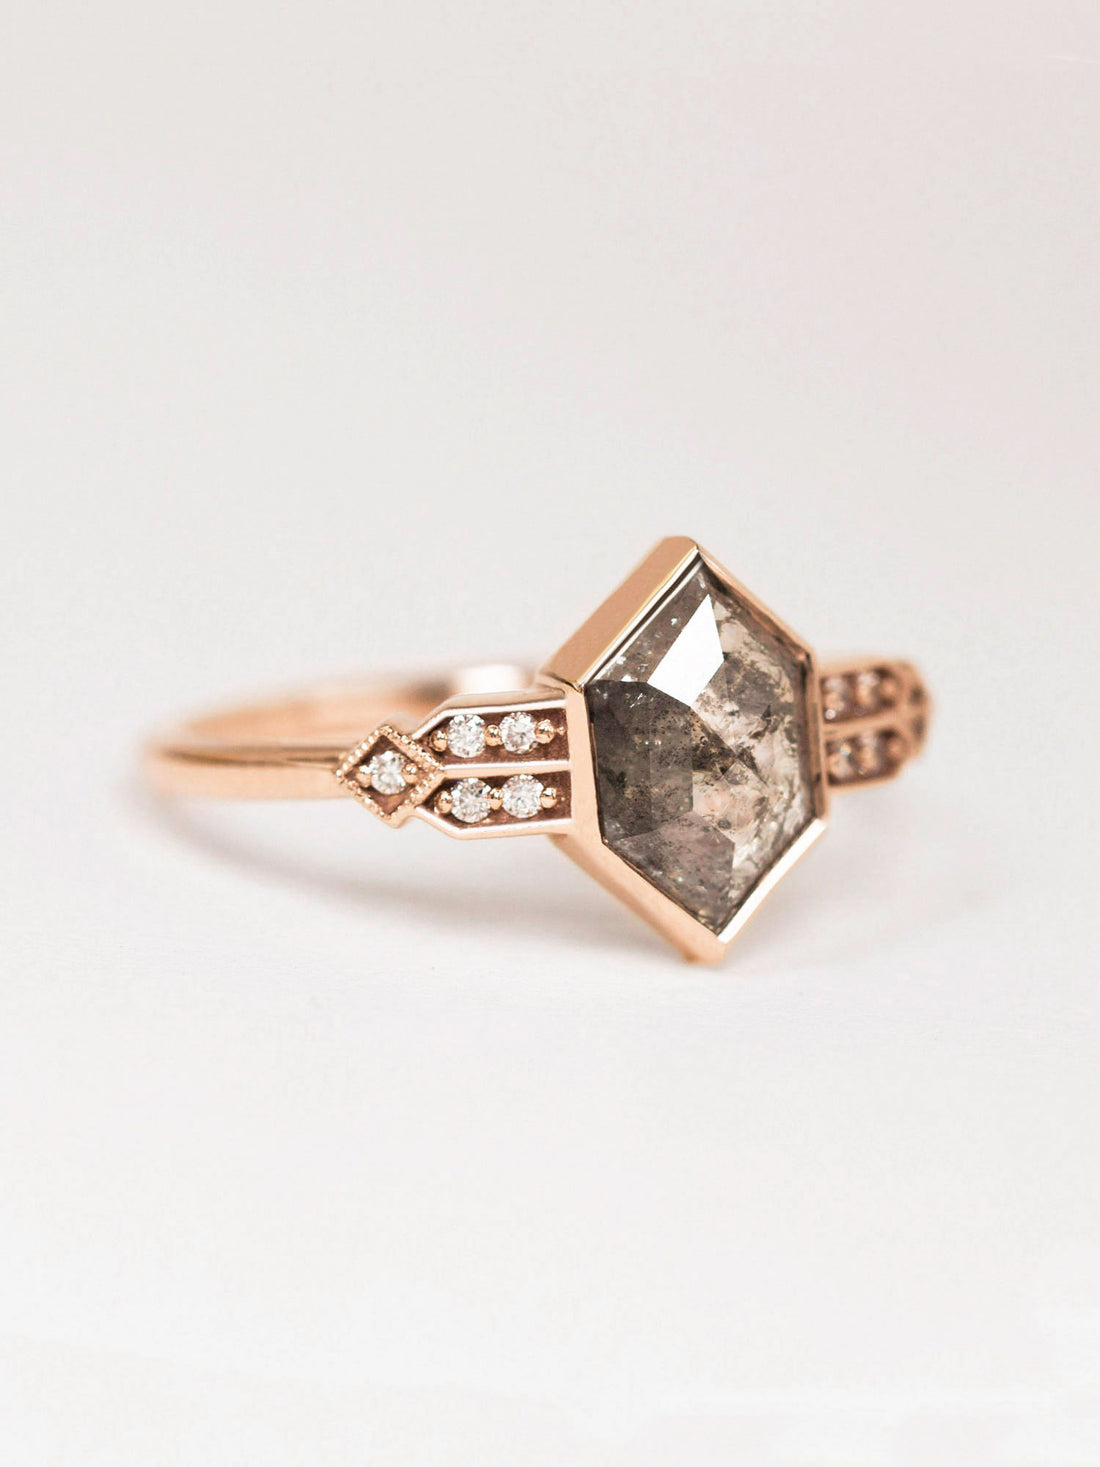 hiddenspace jewelry unique engagement ring architectural design fine jewelry art deco inspire unique engagement ring vintage jewelry bridal ring one-of-a-kind engagement ring alternative jewelry QUINN DESIGN